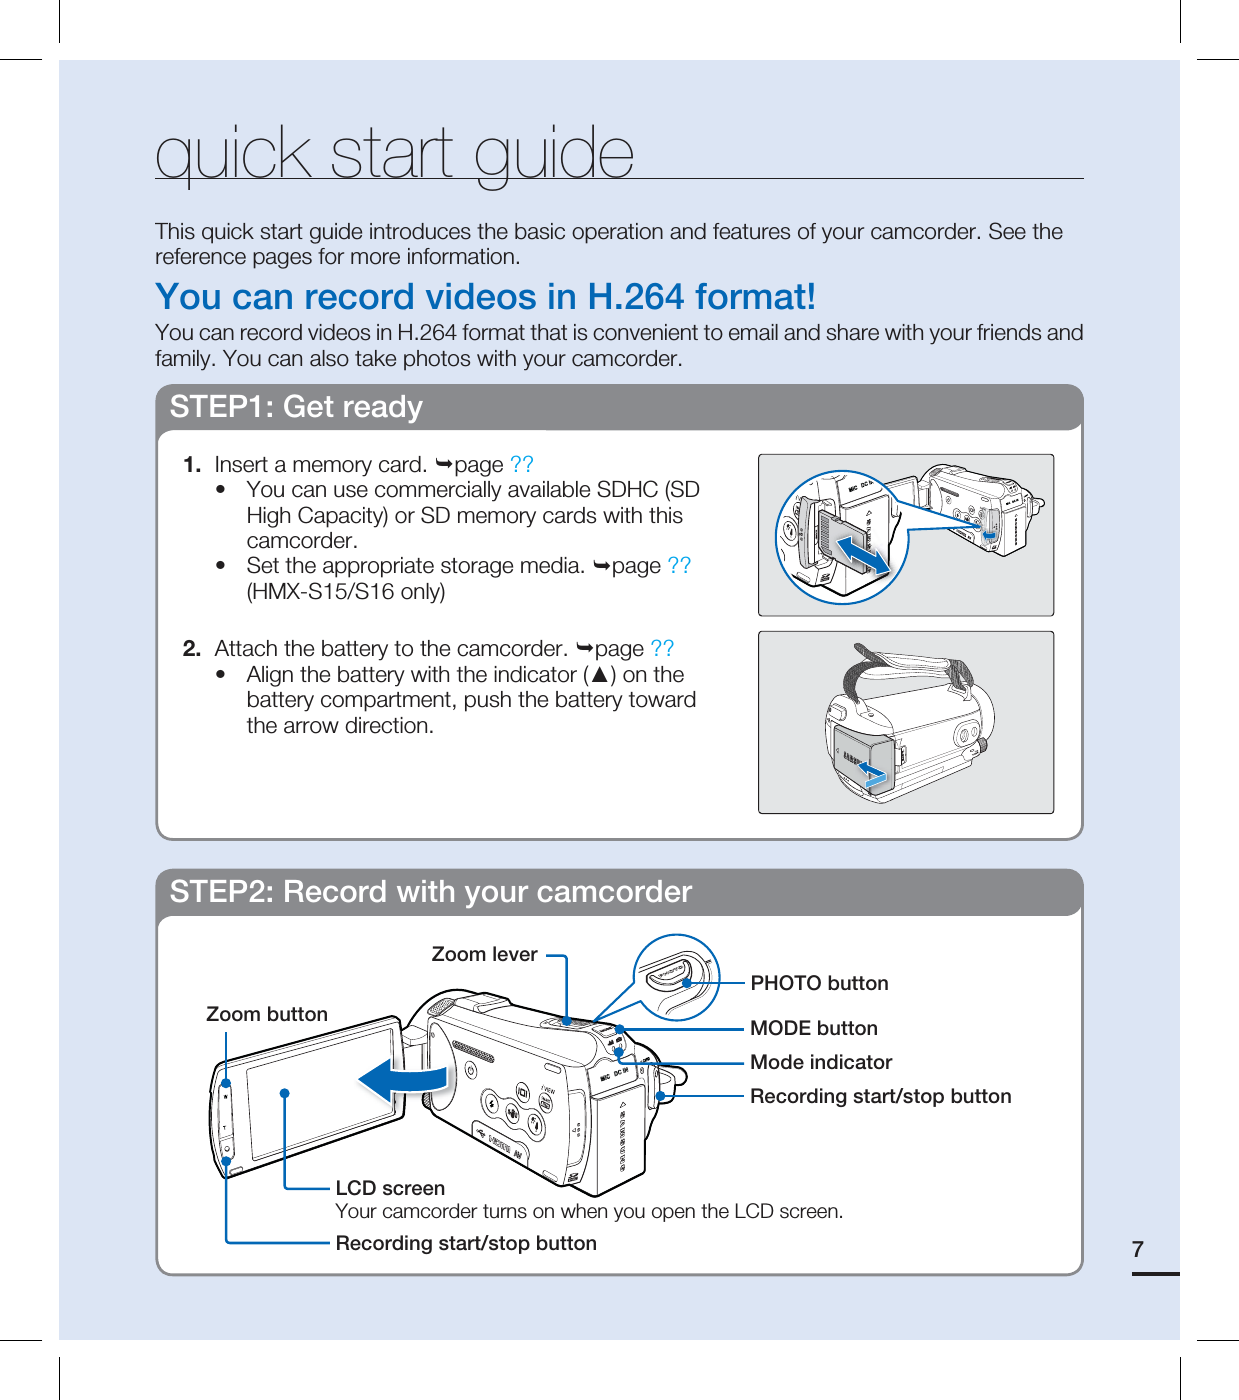 7quick start guideThis quick start guide introduces the basic operation and features of your camcorder. See the reference pages for more information.You can record videos in H.264 format!You can record videos in H.264 format that is convenient to email and share with your friends and family. You can also take photos with your camcorder.STEP1: Get ready1.  Insert a memory card. page ??You can use commercially available SDHC (SD High Capacity) or SD memory cards with this camcorder. Set the appropriate storage media. page ?? (HMX-S15/S16 only)2.  Attach the battery to the camcorder. page ??Align the battery with the indicator (▲) on the battery compartment, push the battery toward the arrow direction.•••STEP2: Record with your camcorderZoom buttonRecording start/stop buttonLCD screenYour camcorder turns on when you open the LCD screen.MODE buttonPHOTO buttonMode indicatorZoom leverRecording start/stop button